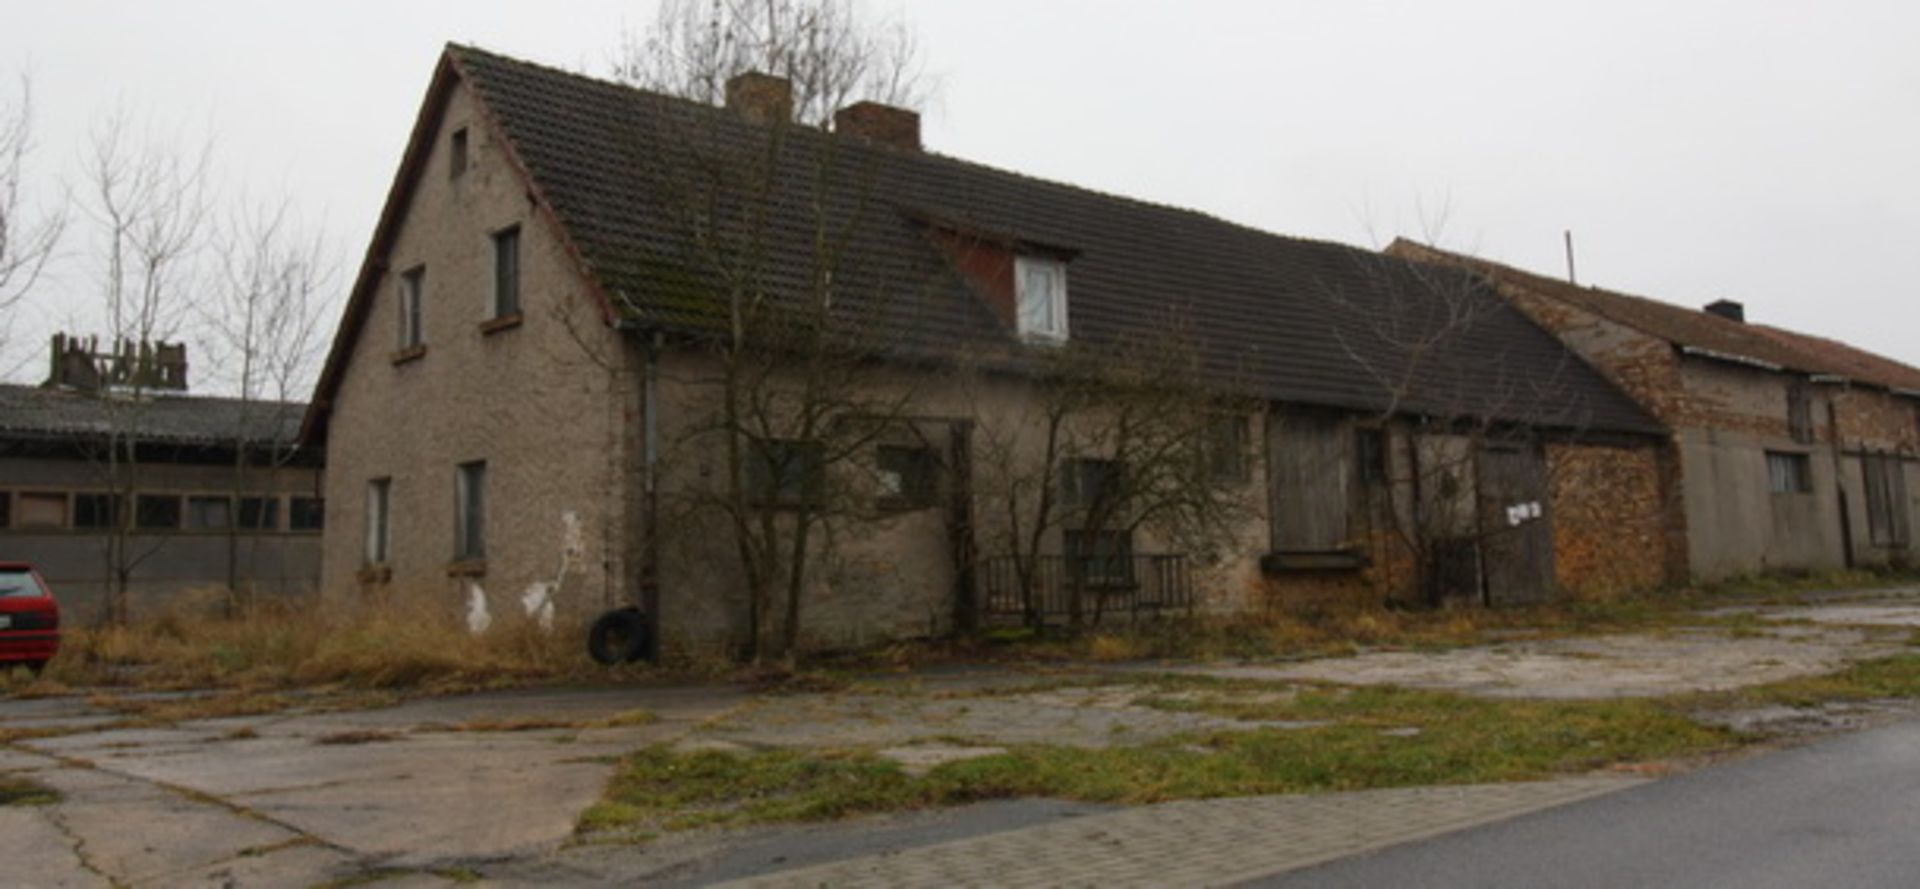 LARGE FARM AND 3,681 SQM OF LAND IN LIESKAU, GERMANY - Image 29 of 54